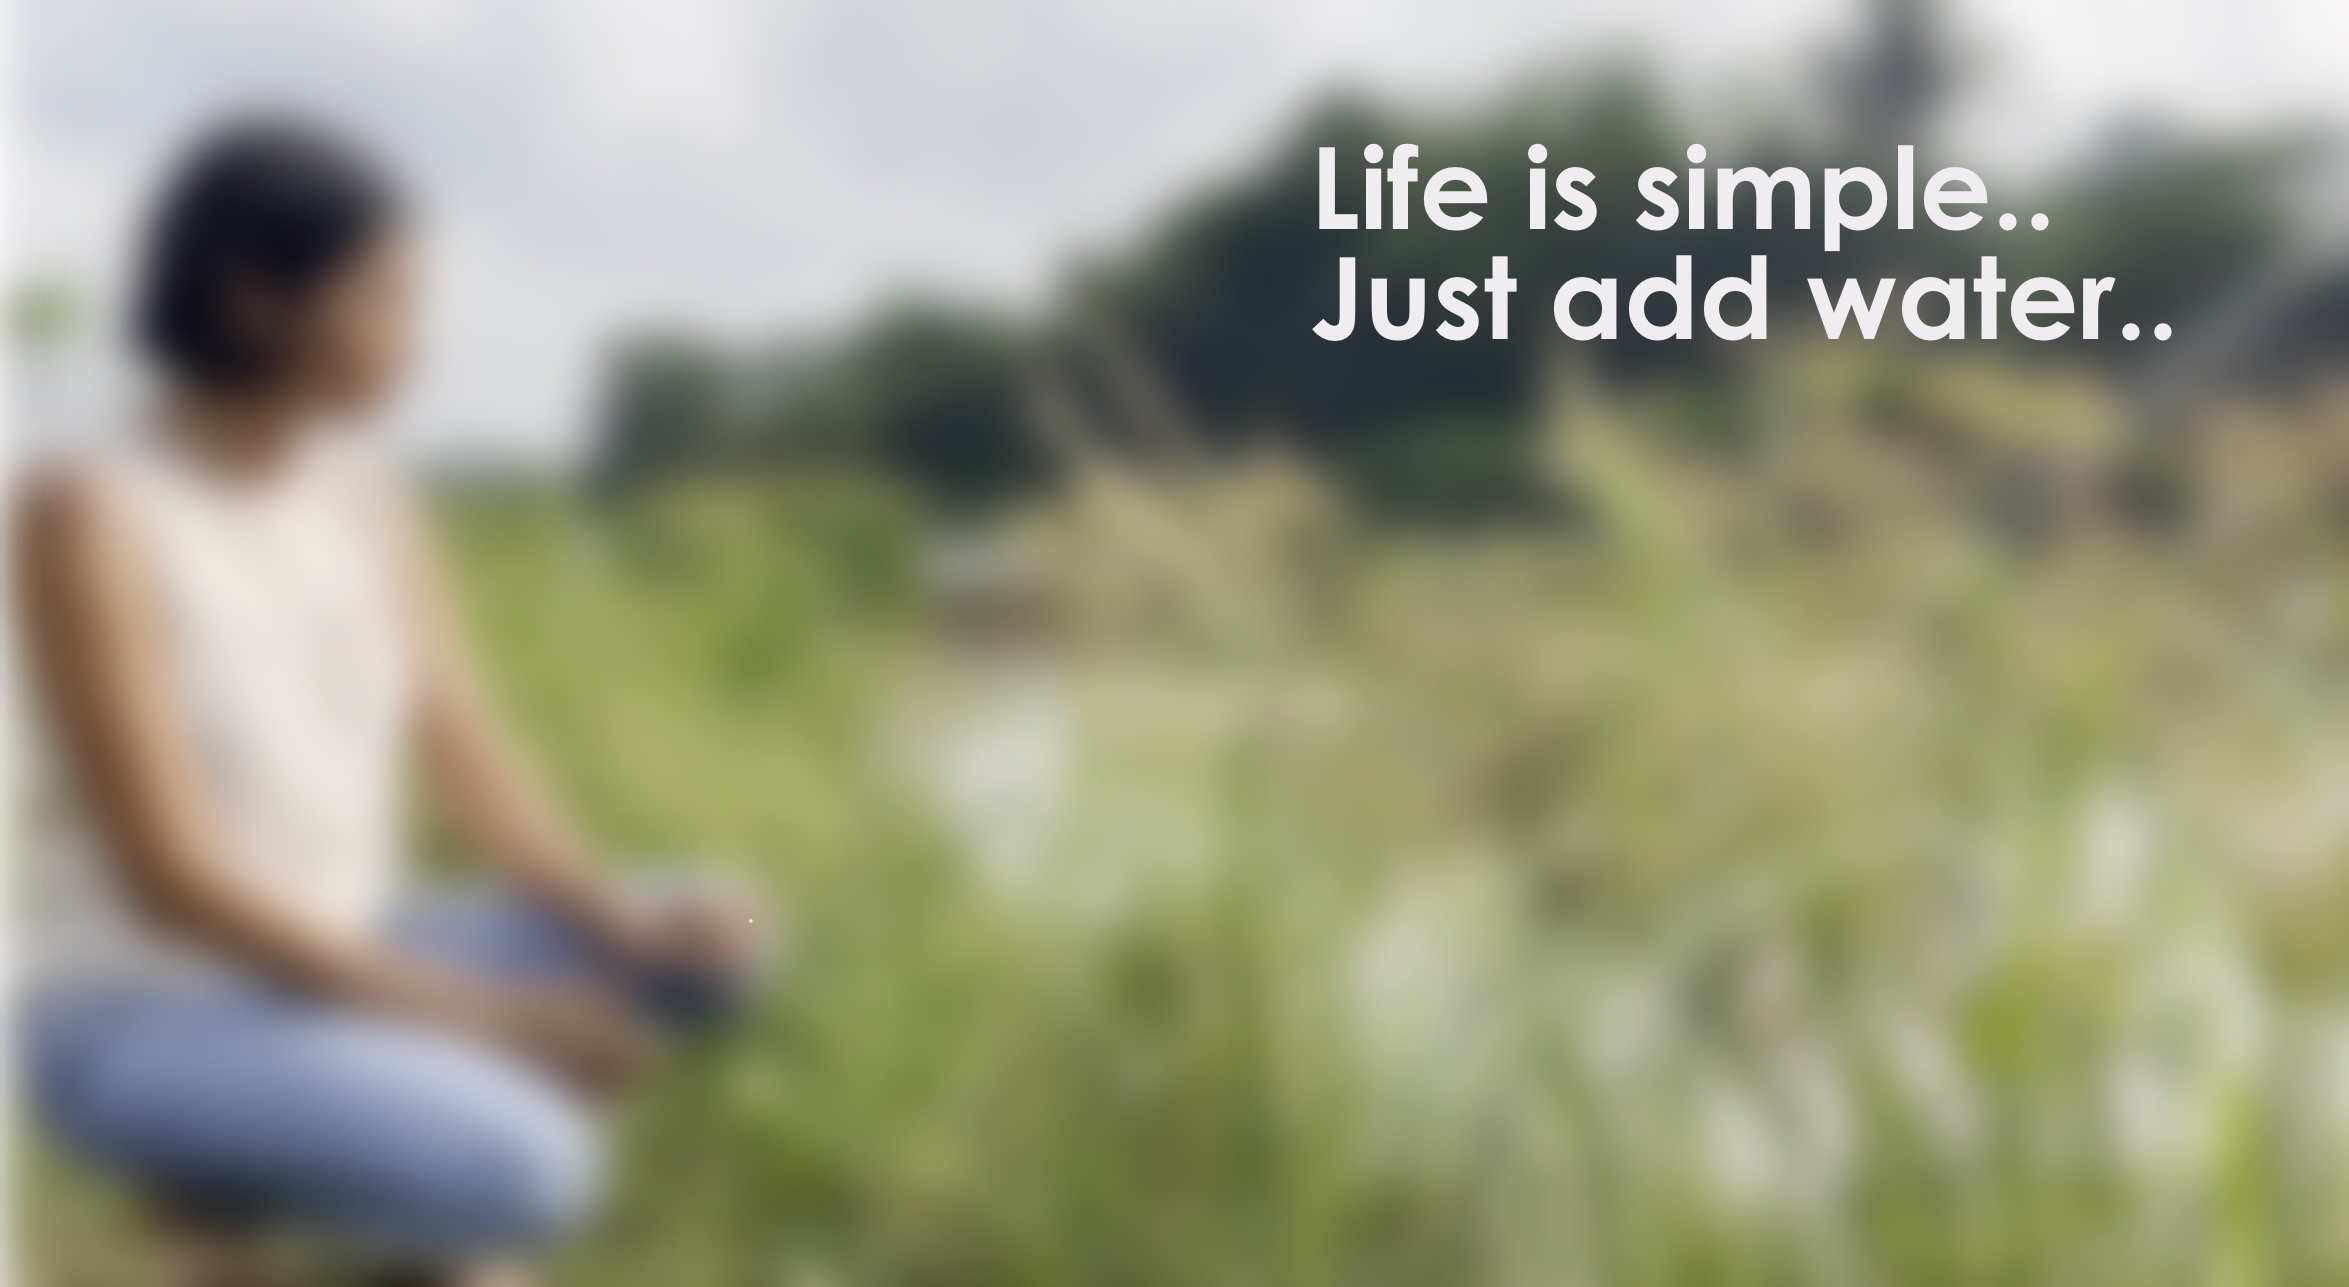 Life is simple… Just add water…